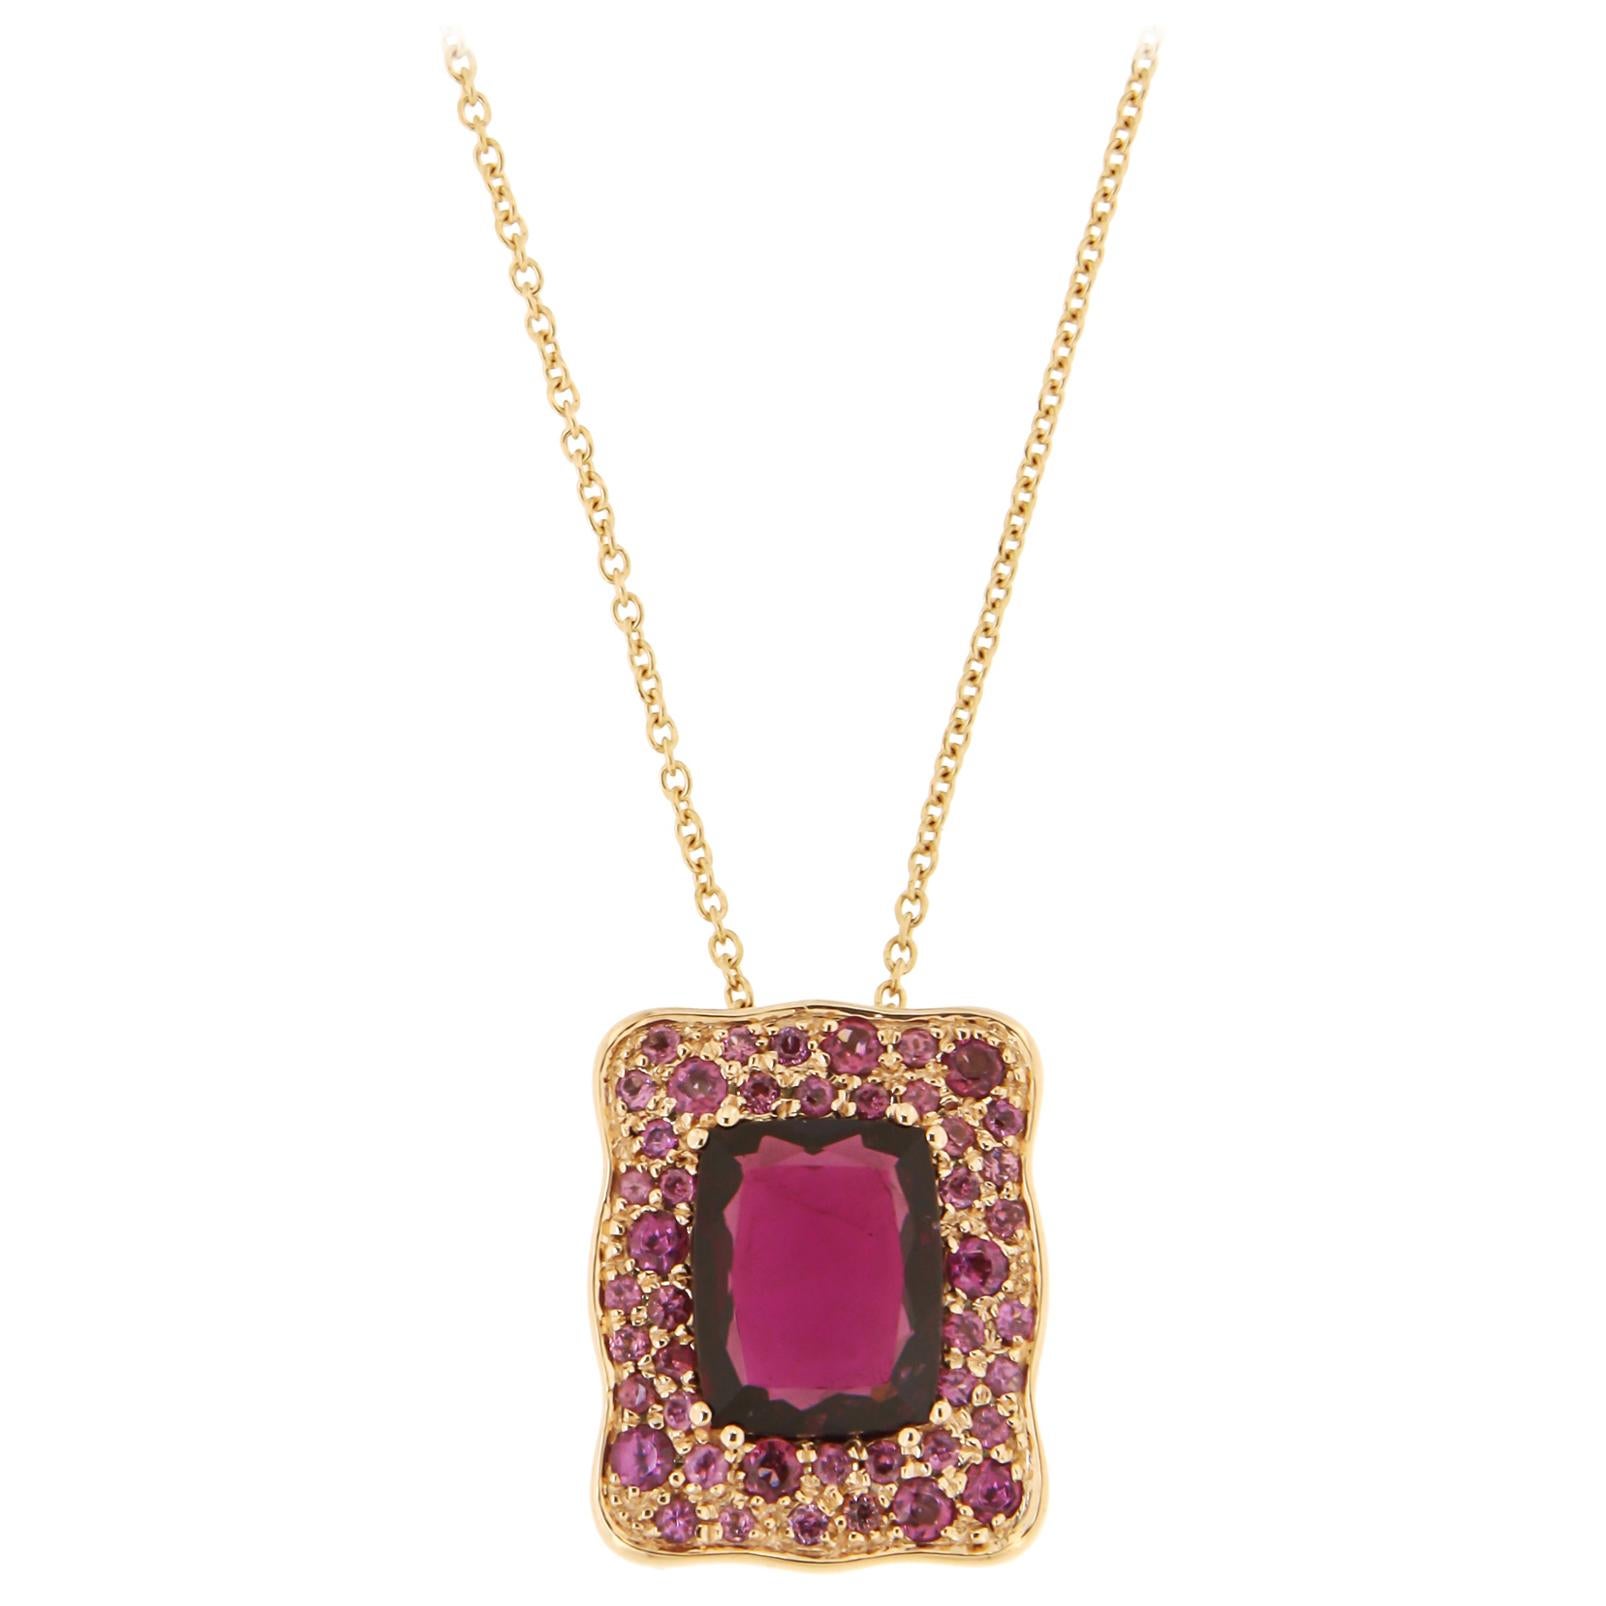 Stylish 18k Rhodolite Rose Gold Pendant Necklace for Her Made in Italy For Sale